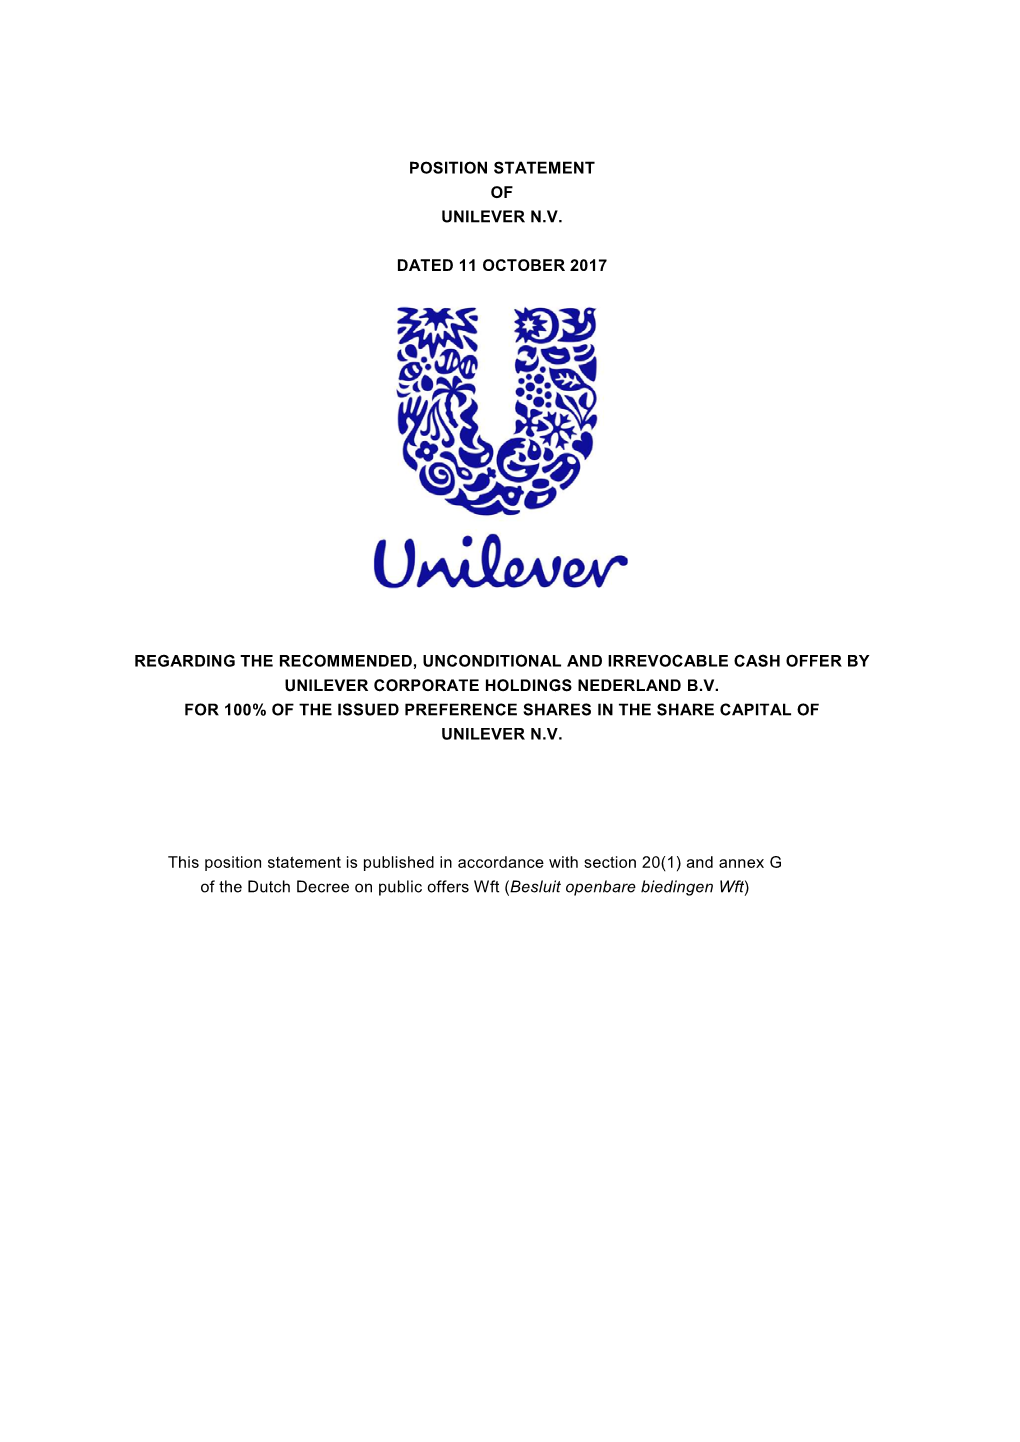 Position Statement of Unilever N.V. Dated 11 October 2017 Regarding the Recommended, Unconditional and Irrevocable Cash Offer By